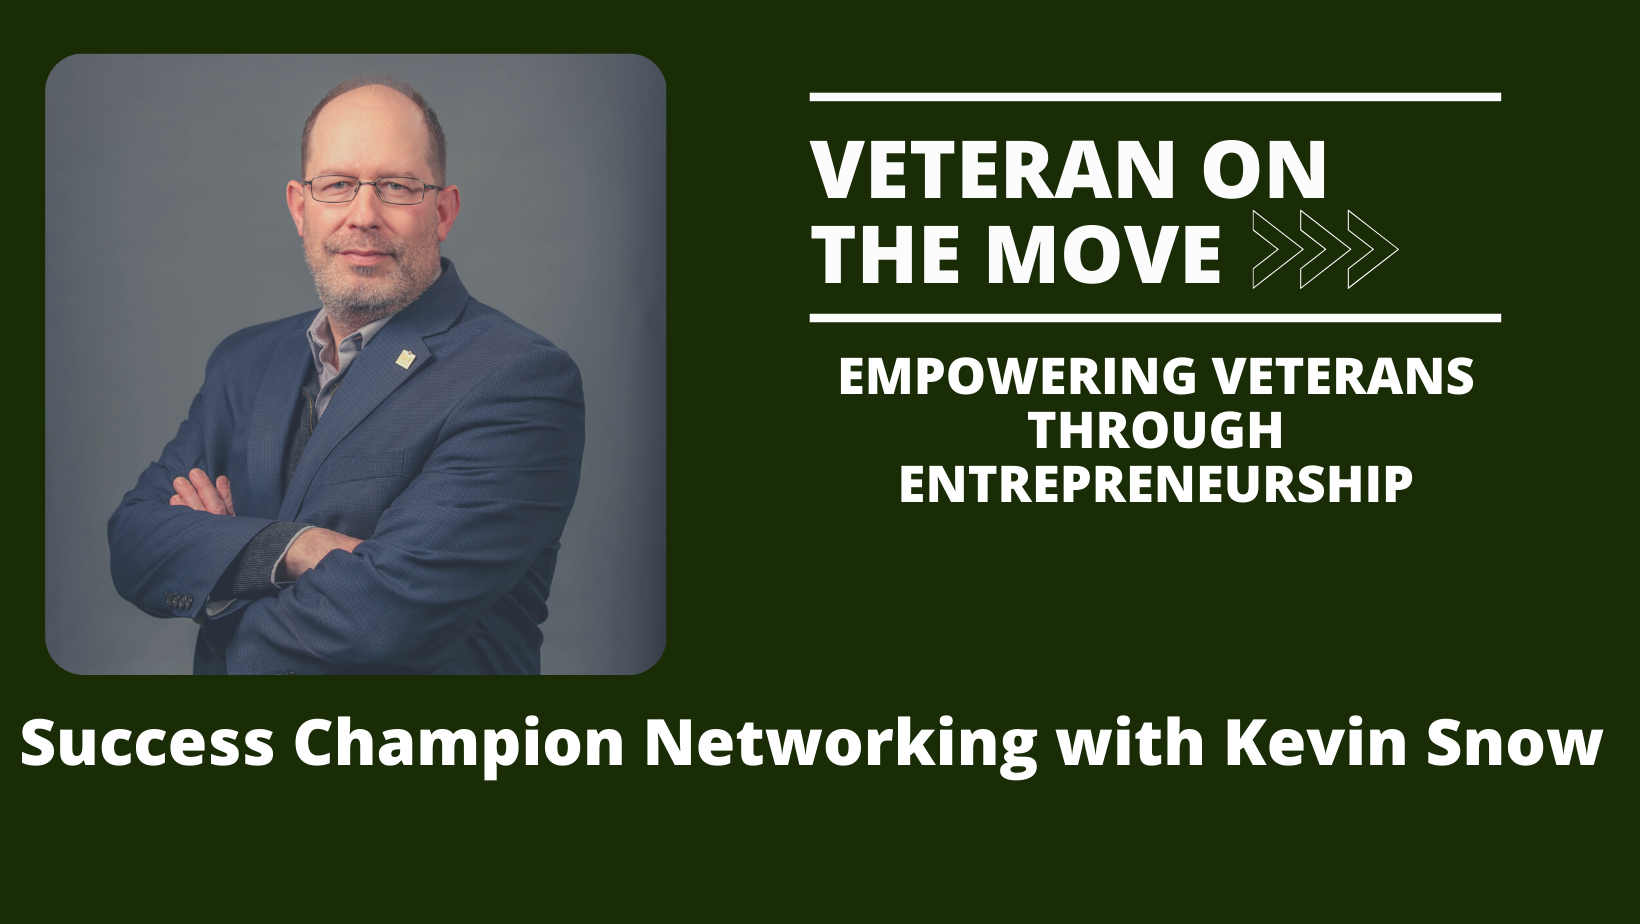 Kevin Snow, Veteran On the Move